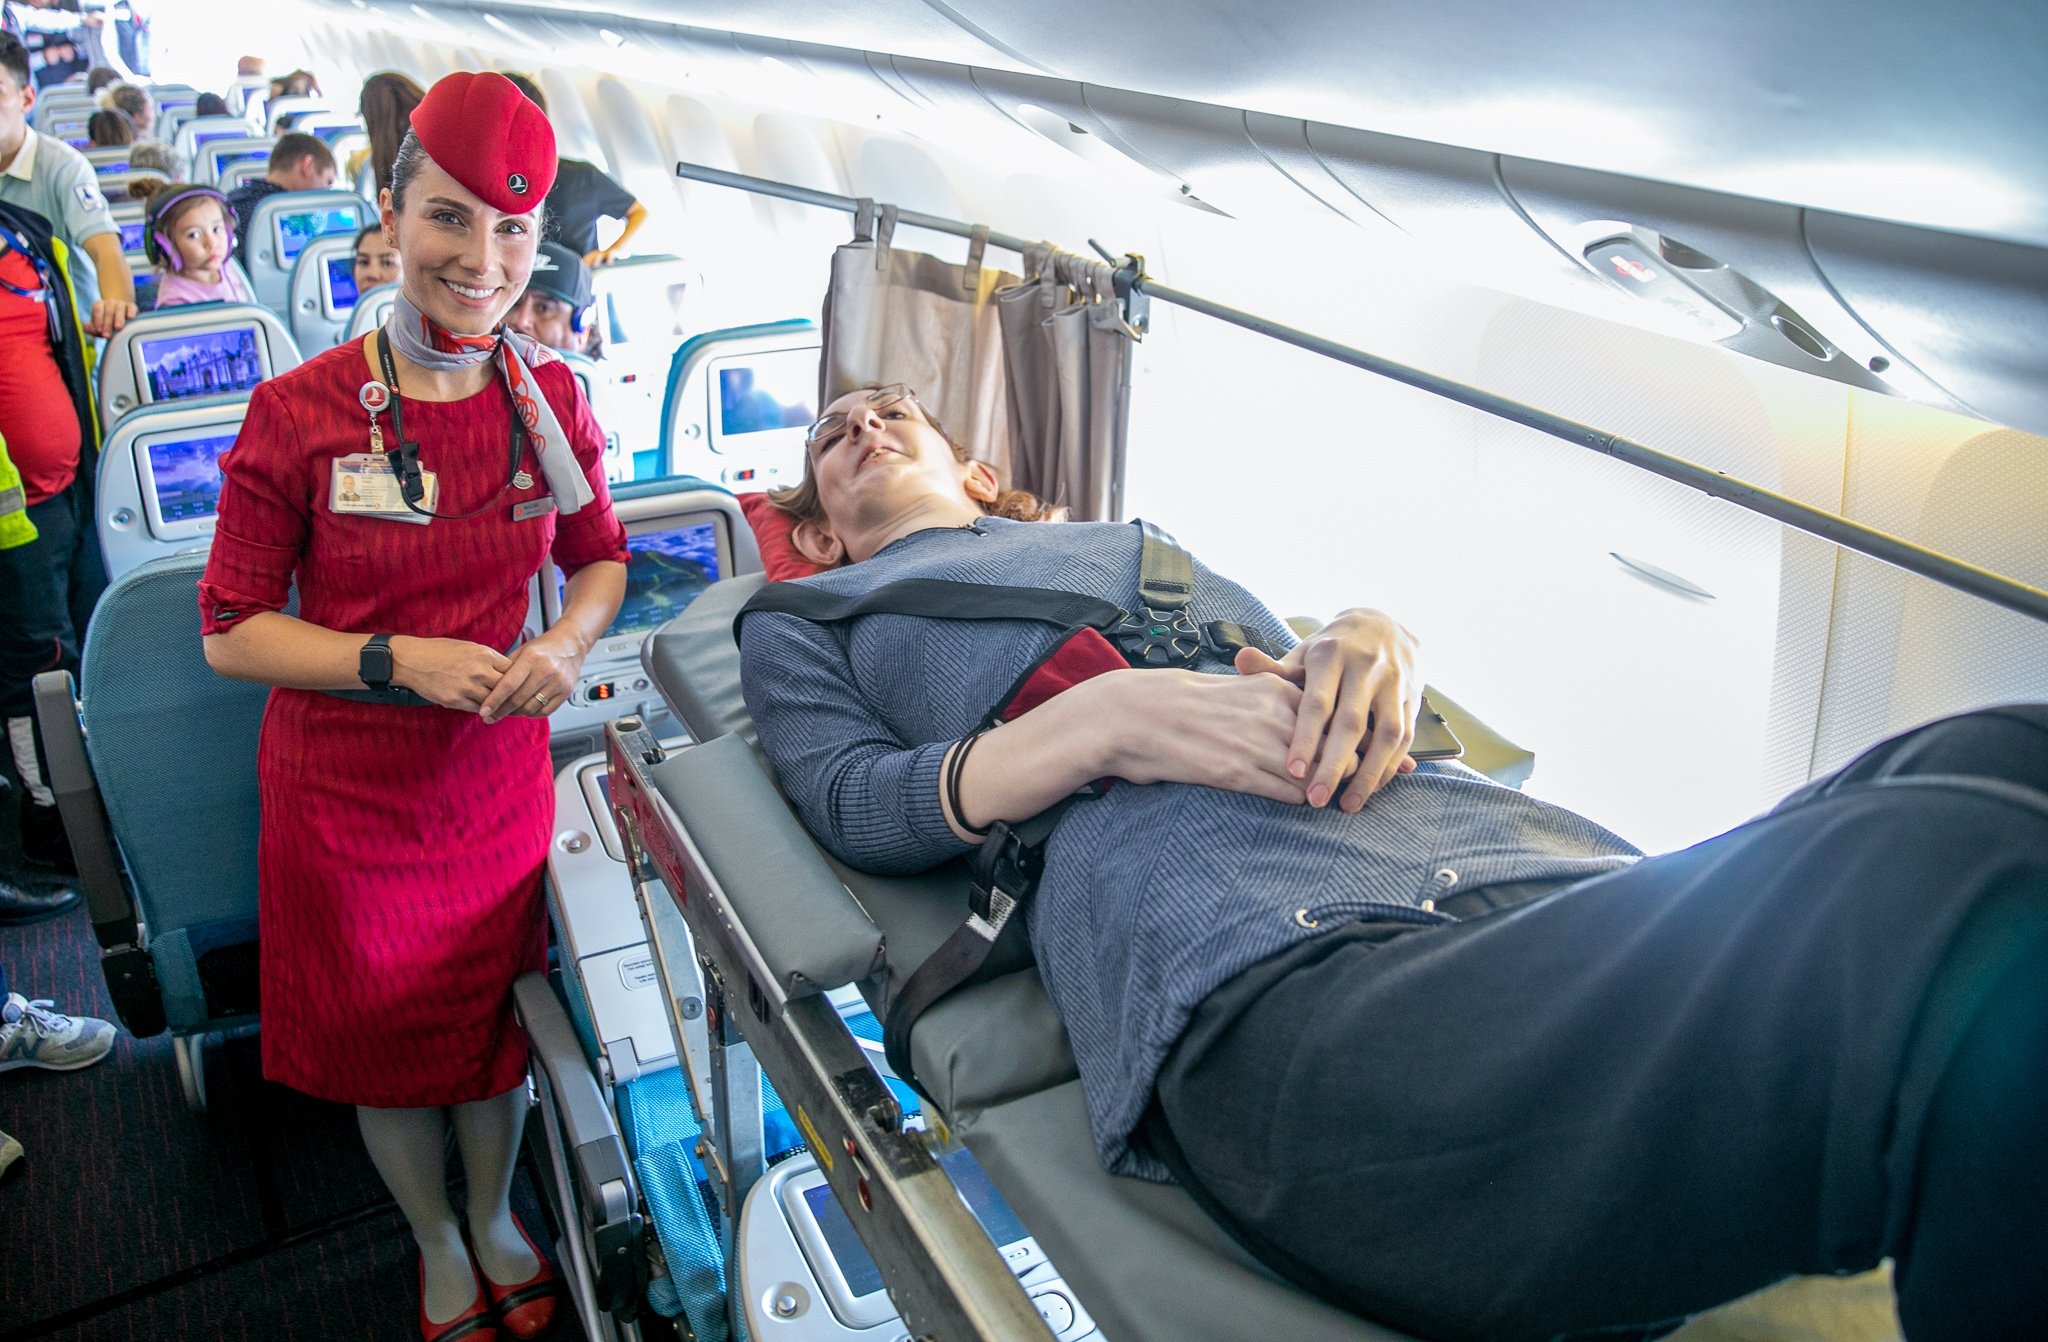 Turkish Airlines helps world's tallest woman fly for first time